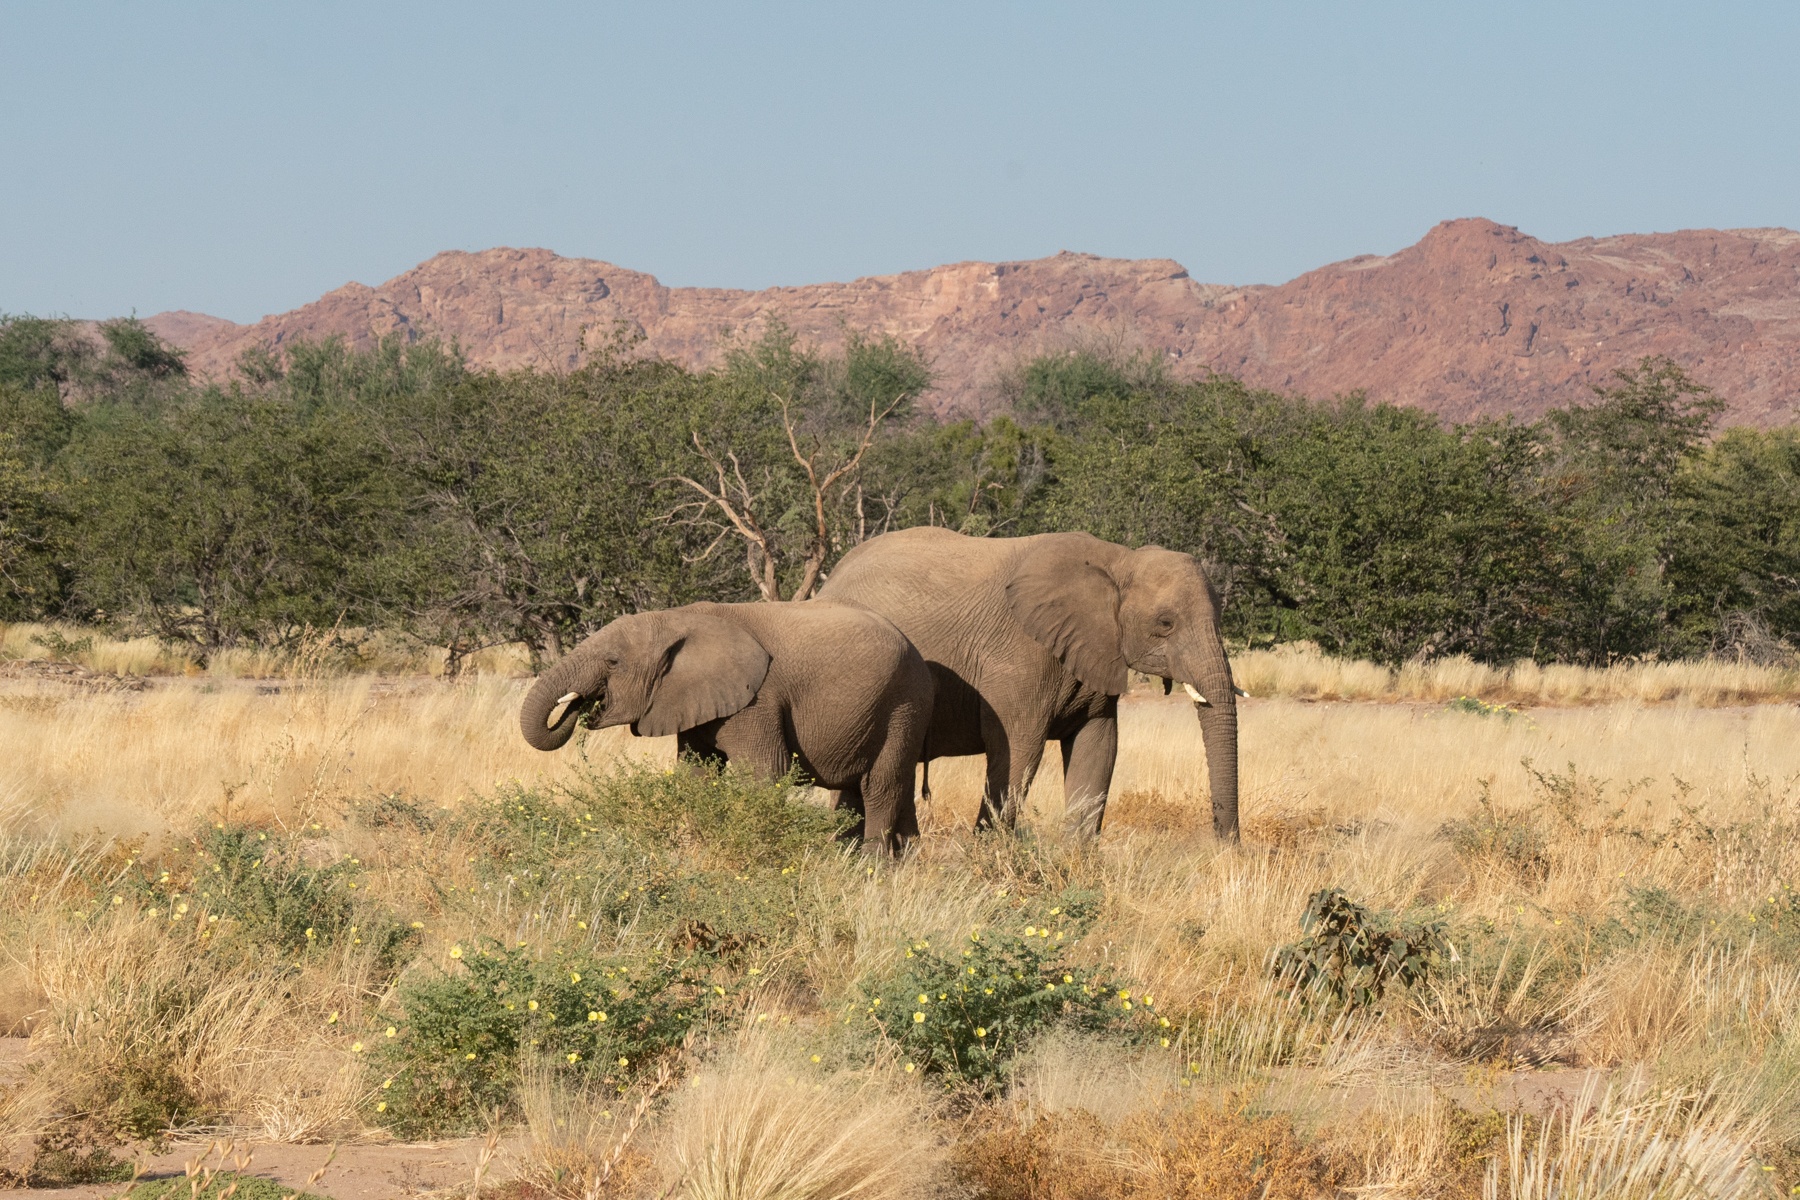 Namibia's desert elephants enjoy grazing after the deserts bloom in an ephemeral river